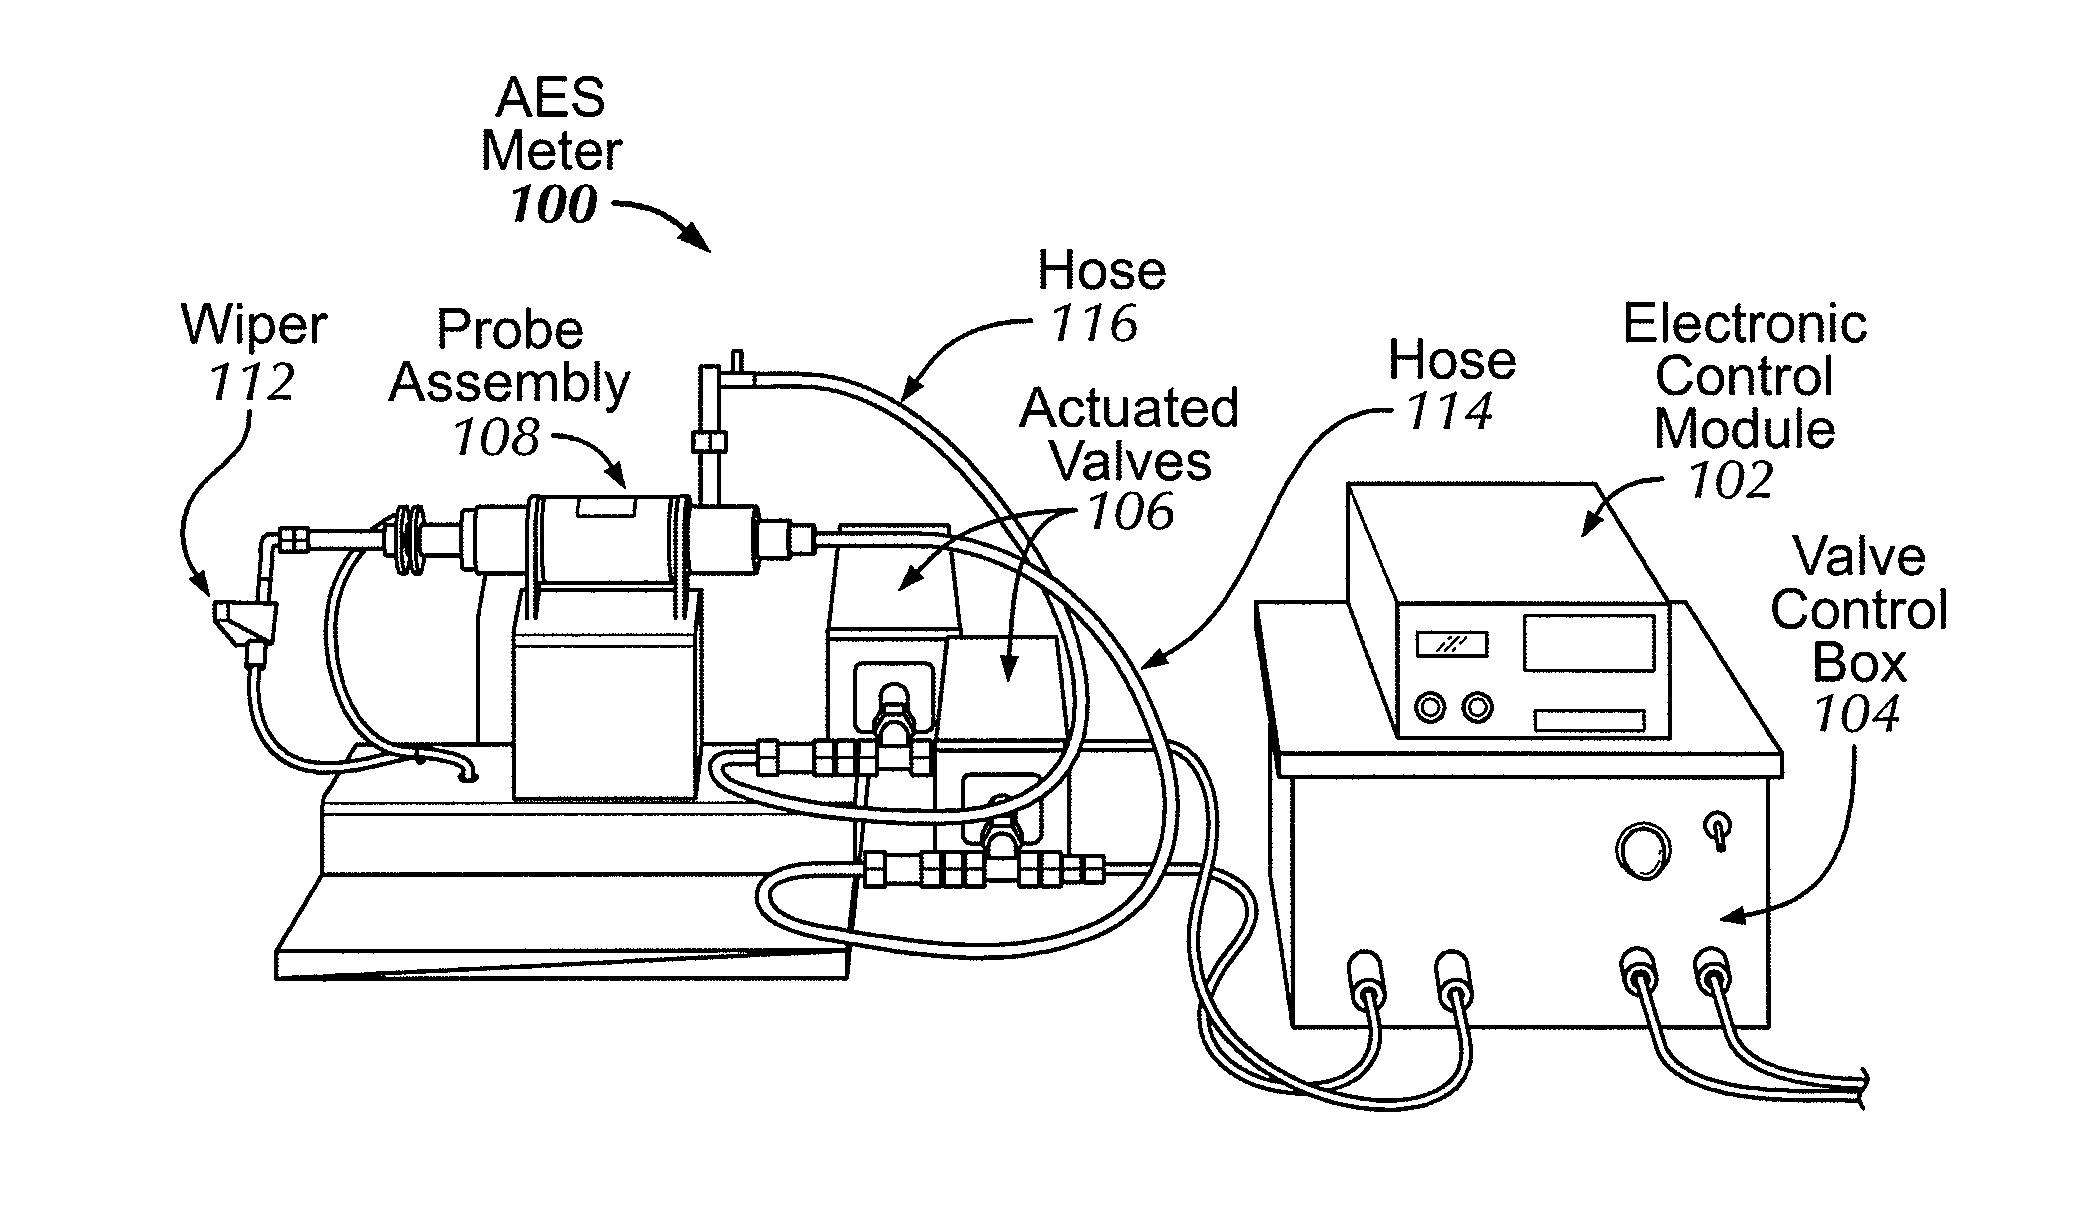 Automated electrical stability meter